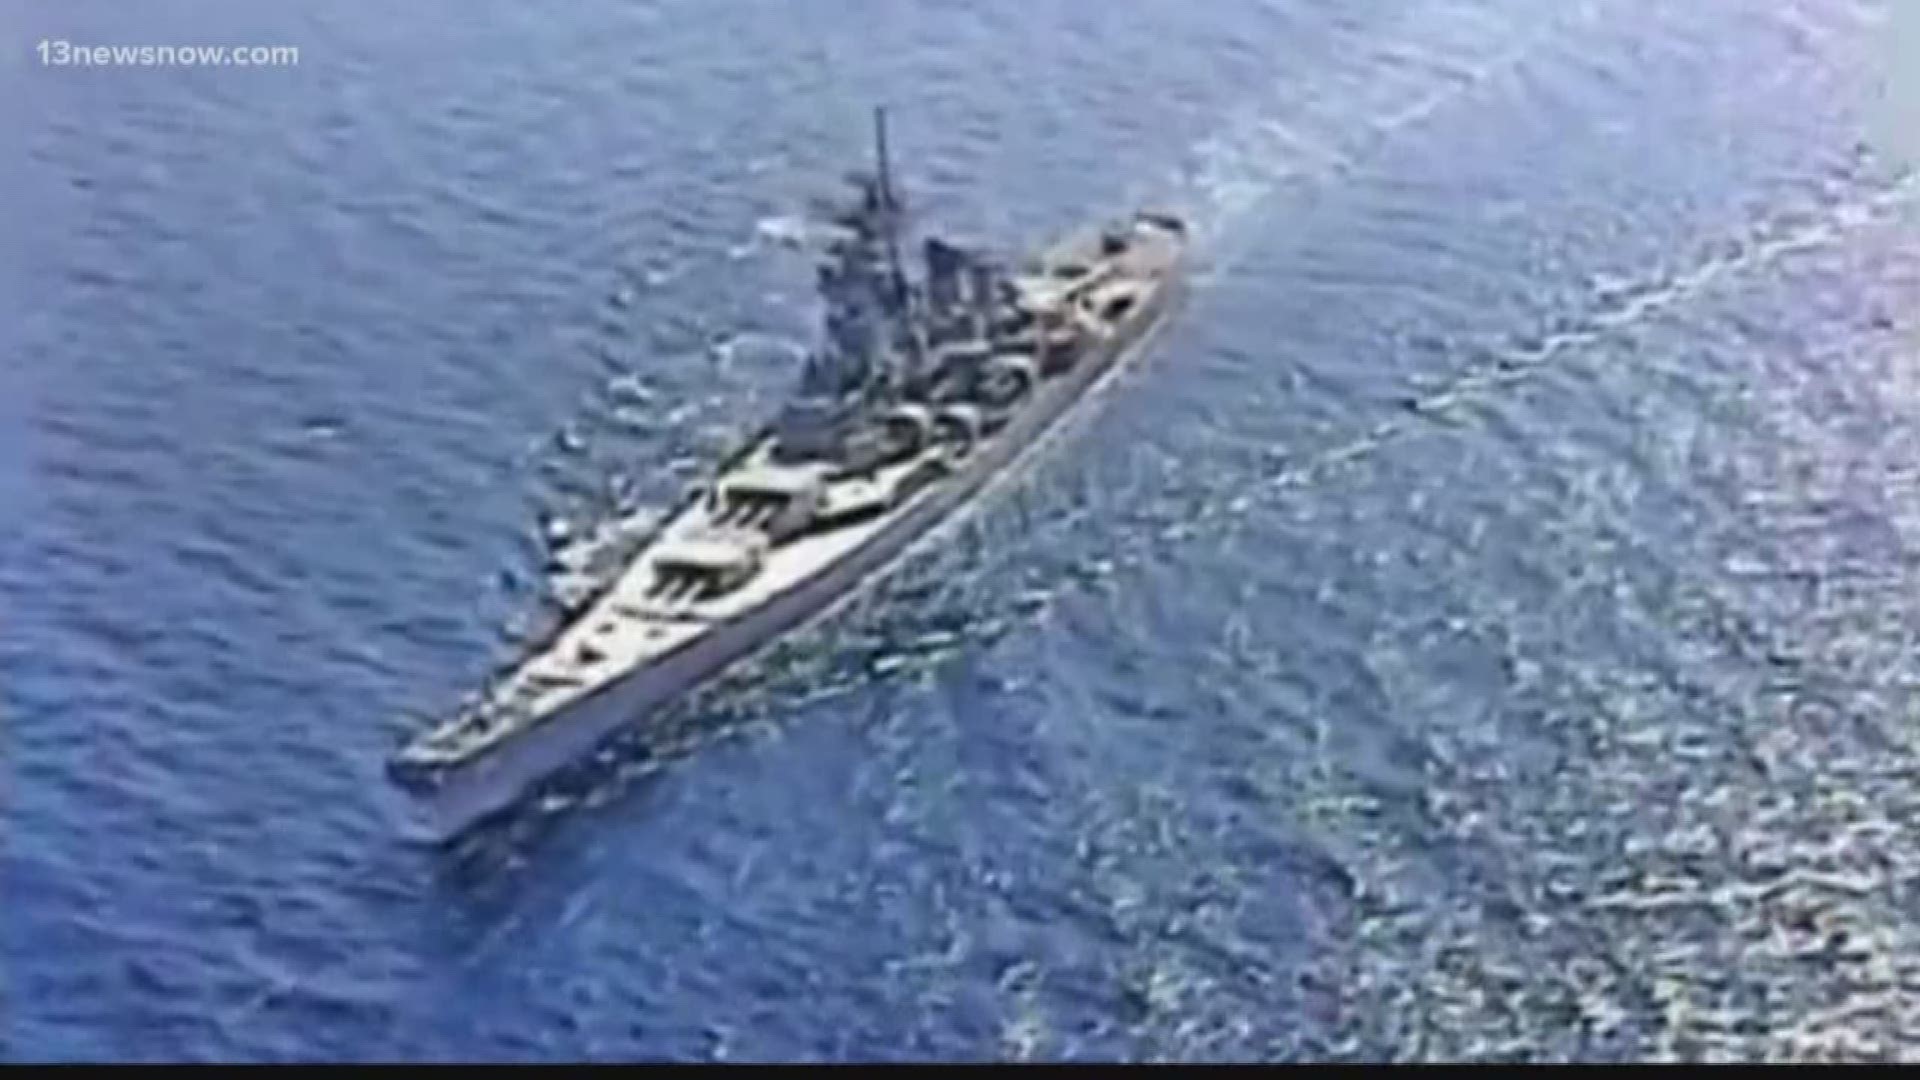 On April 19, 1989, an explosion aboard the battleship claimed the lives of 47 crewmen.